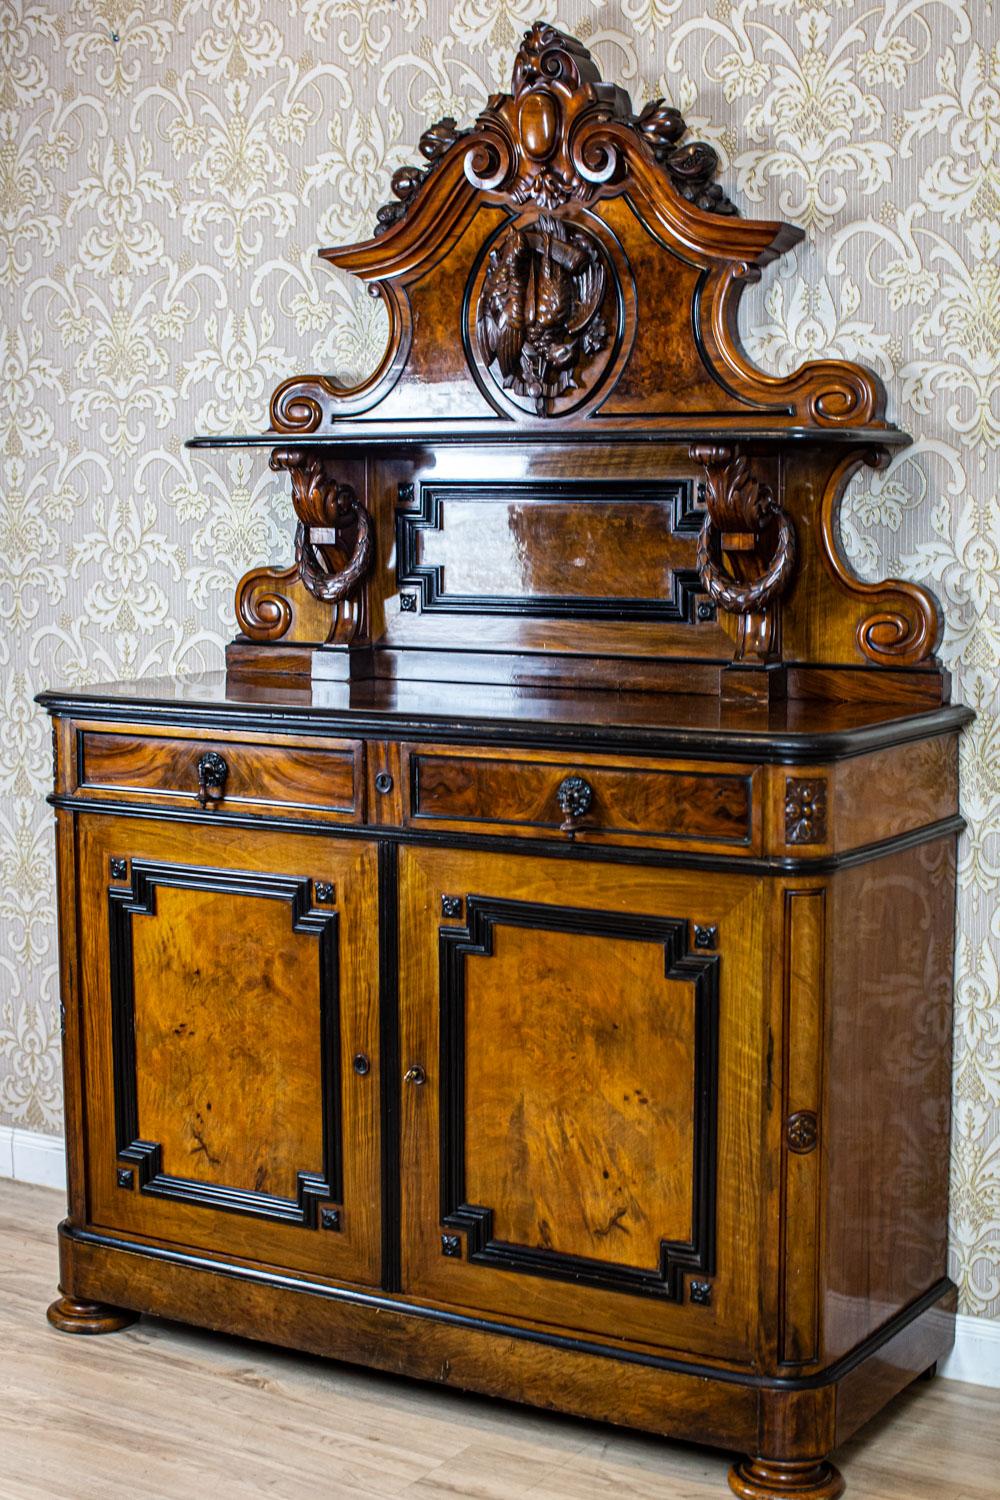 Hunter Commode from the Mid 19th Century in Walnut Veneer

We present you this piece of furniture composed of a two-leaf corpus with two drawers under the top.
The corners of the commode are rounded and decorated with carved elements.
The add-on